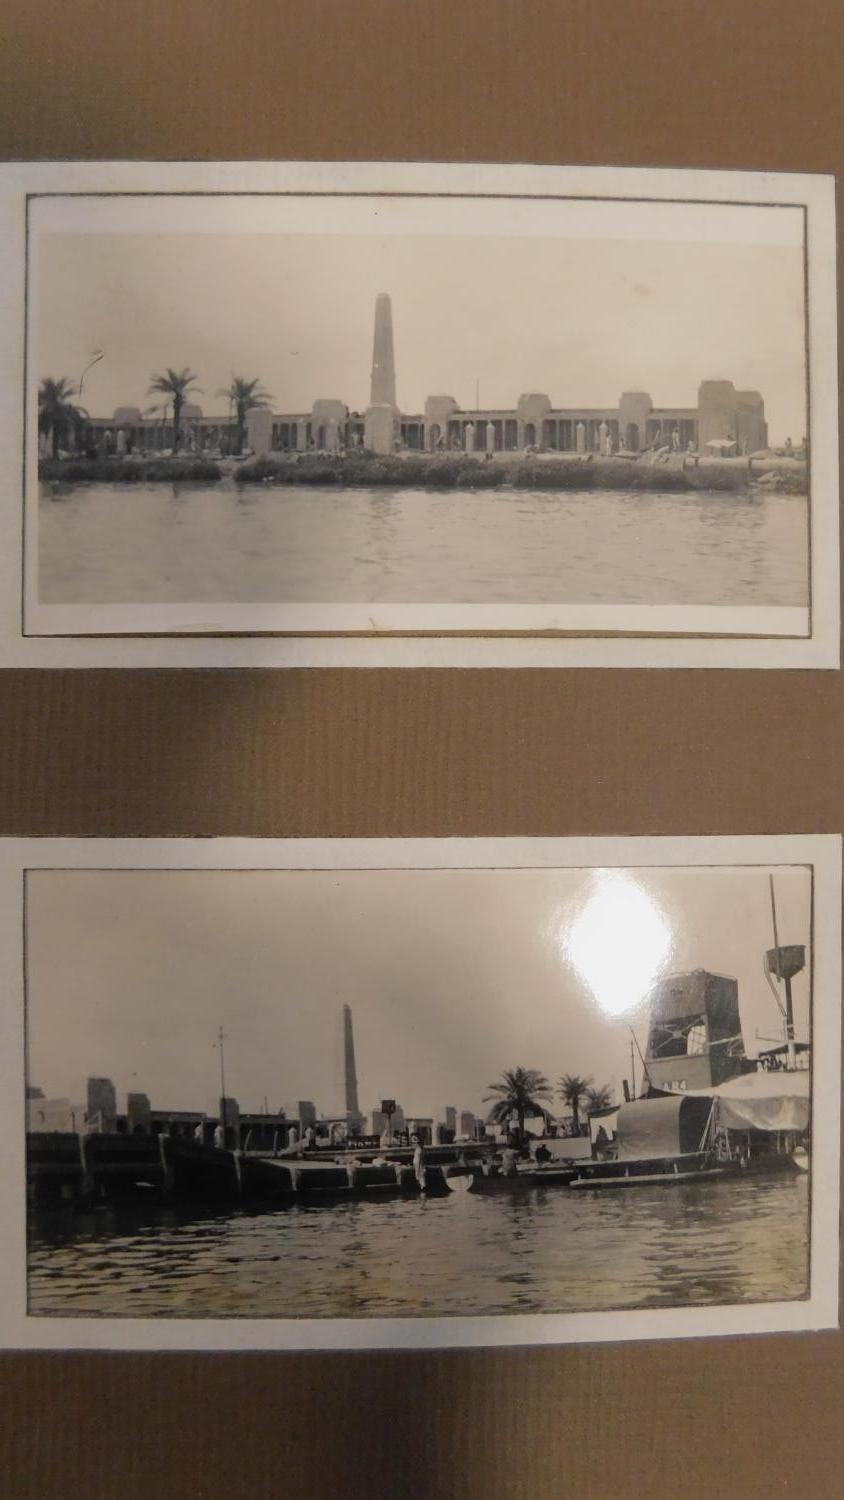 A vintage 1930's photo album containing black and white photos of the Basra War memorial in Iraq - Image 17 of 25